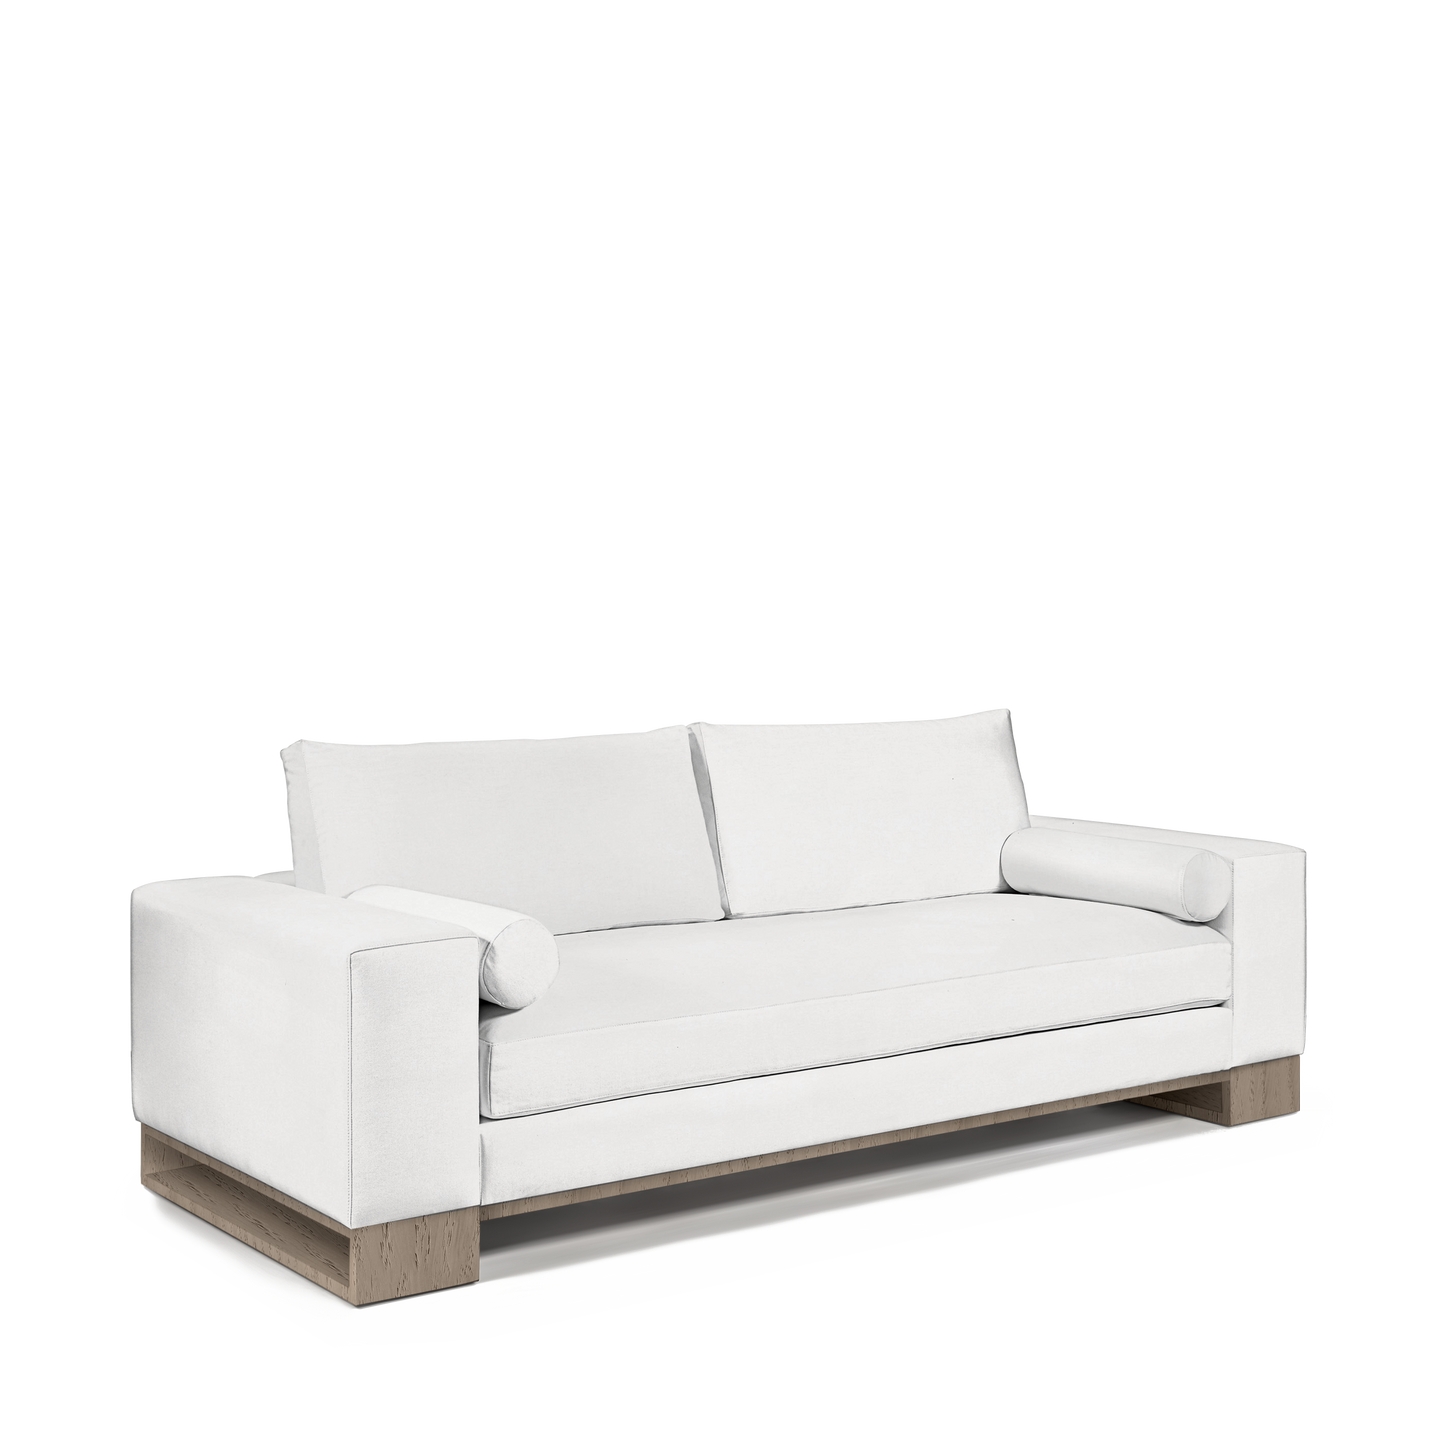 TERRA 2,5-seater sofa with linara white textile and natural grey wood legs